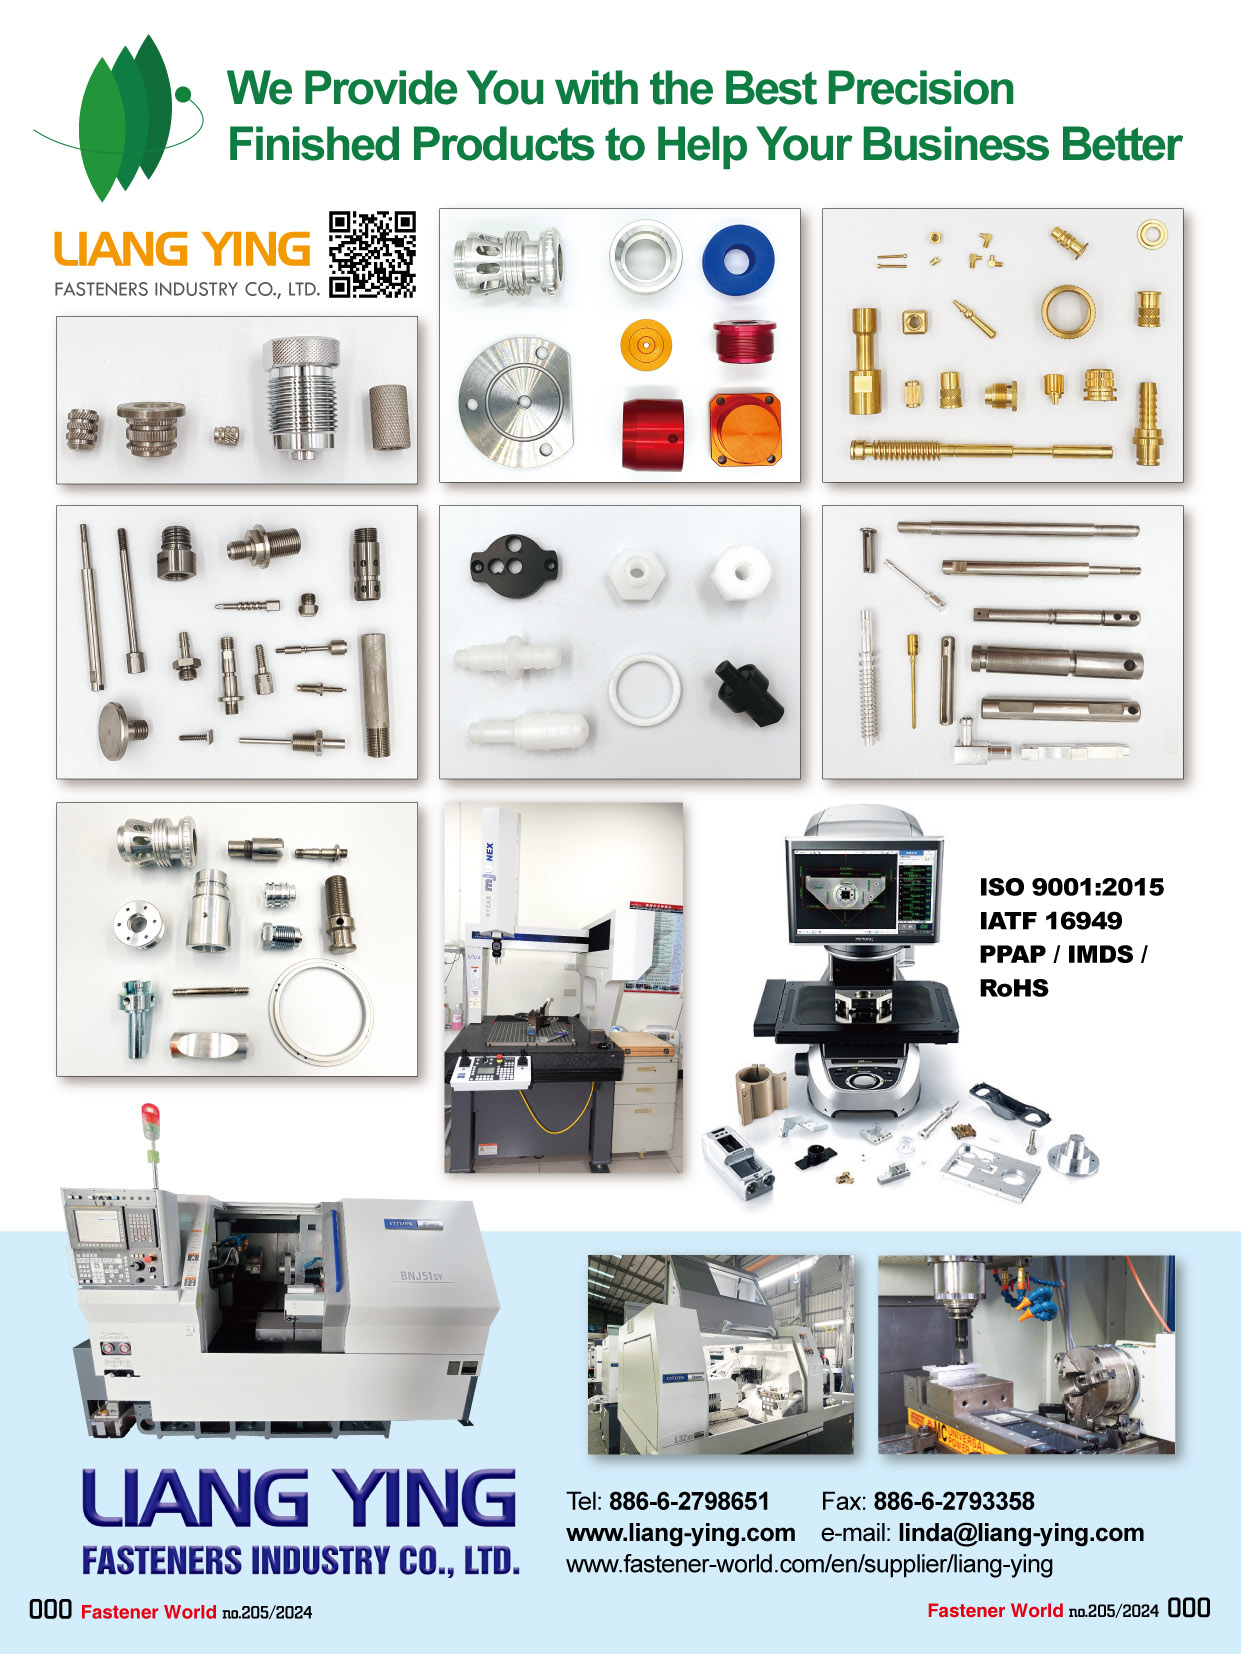 Liang Ying Fasteners Industry Co., Ltd. , -Automotive -hand tool -Electronic  -OEM -Furniture -Shaft  -CNC Machined parts -CNC  Turned parts